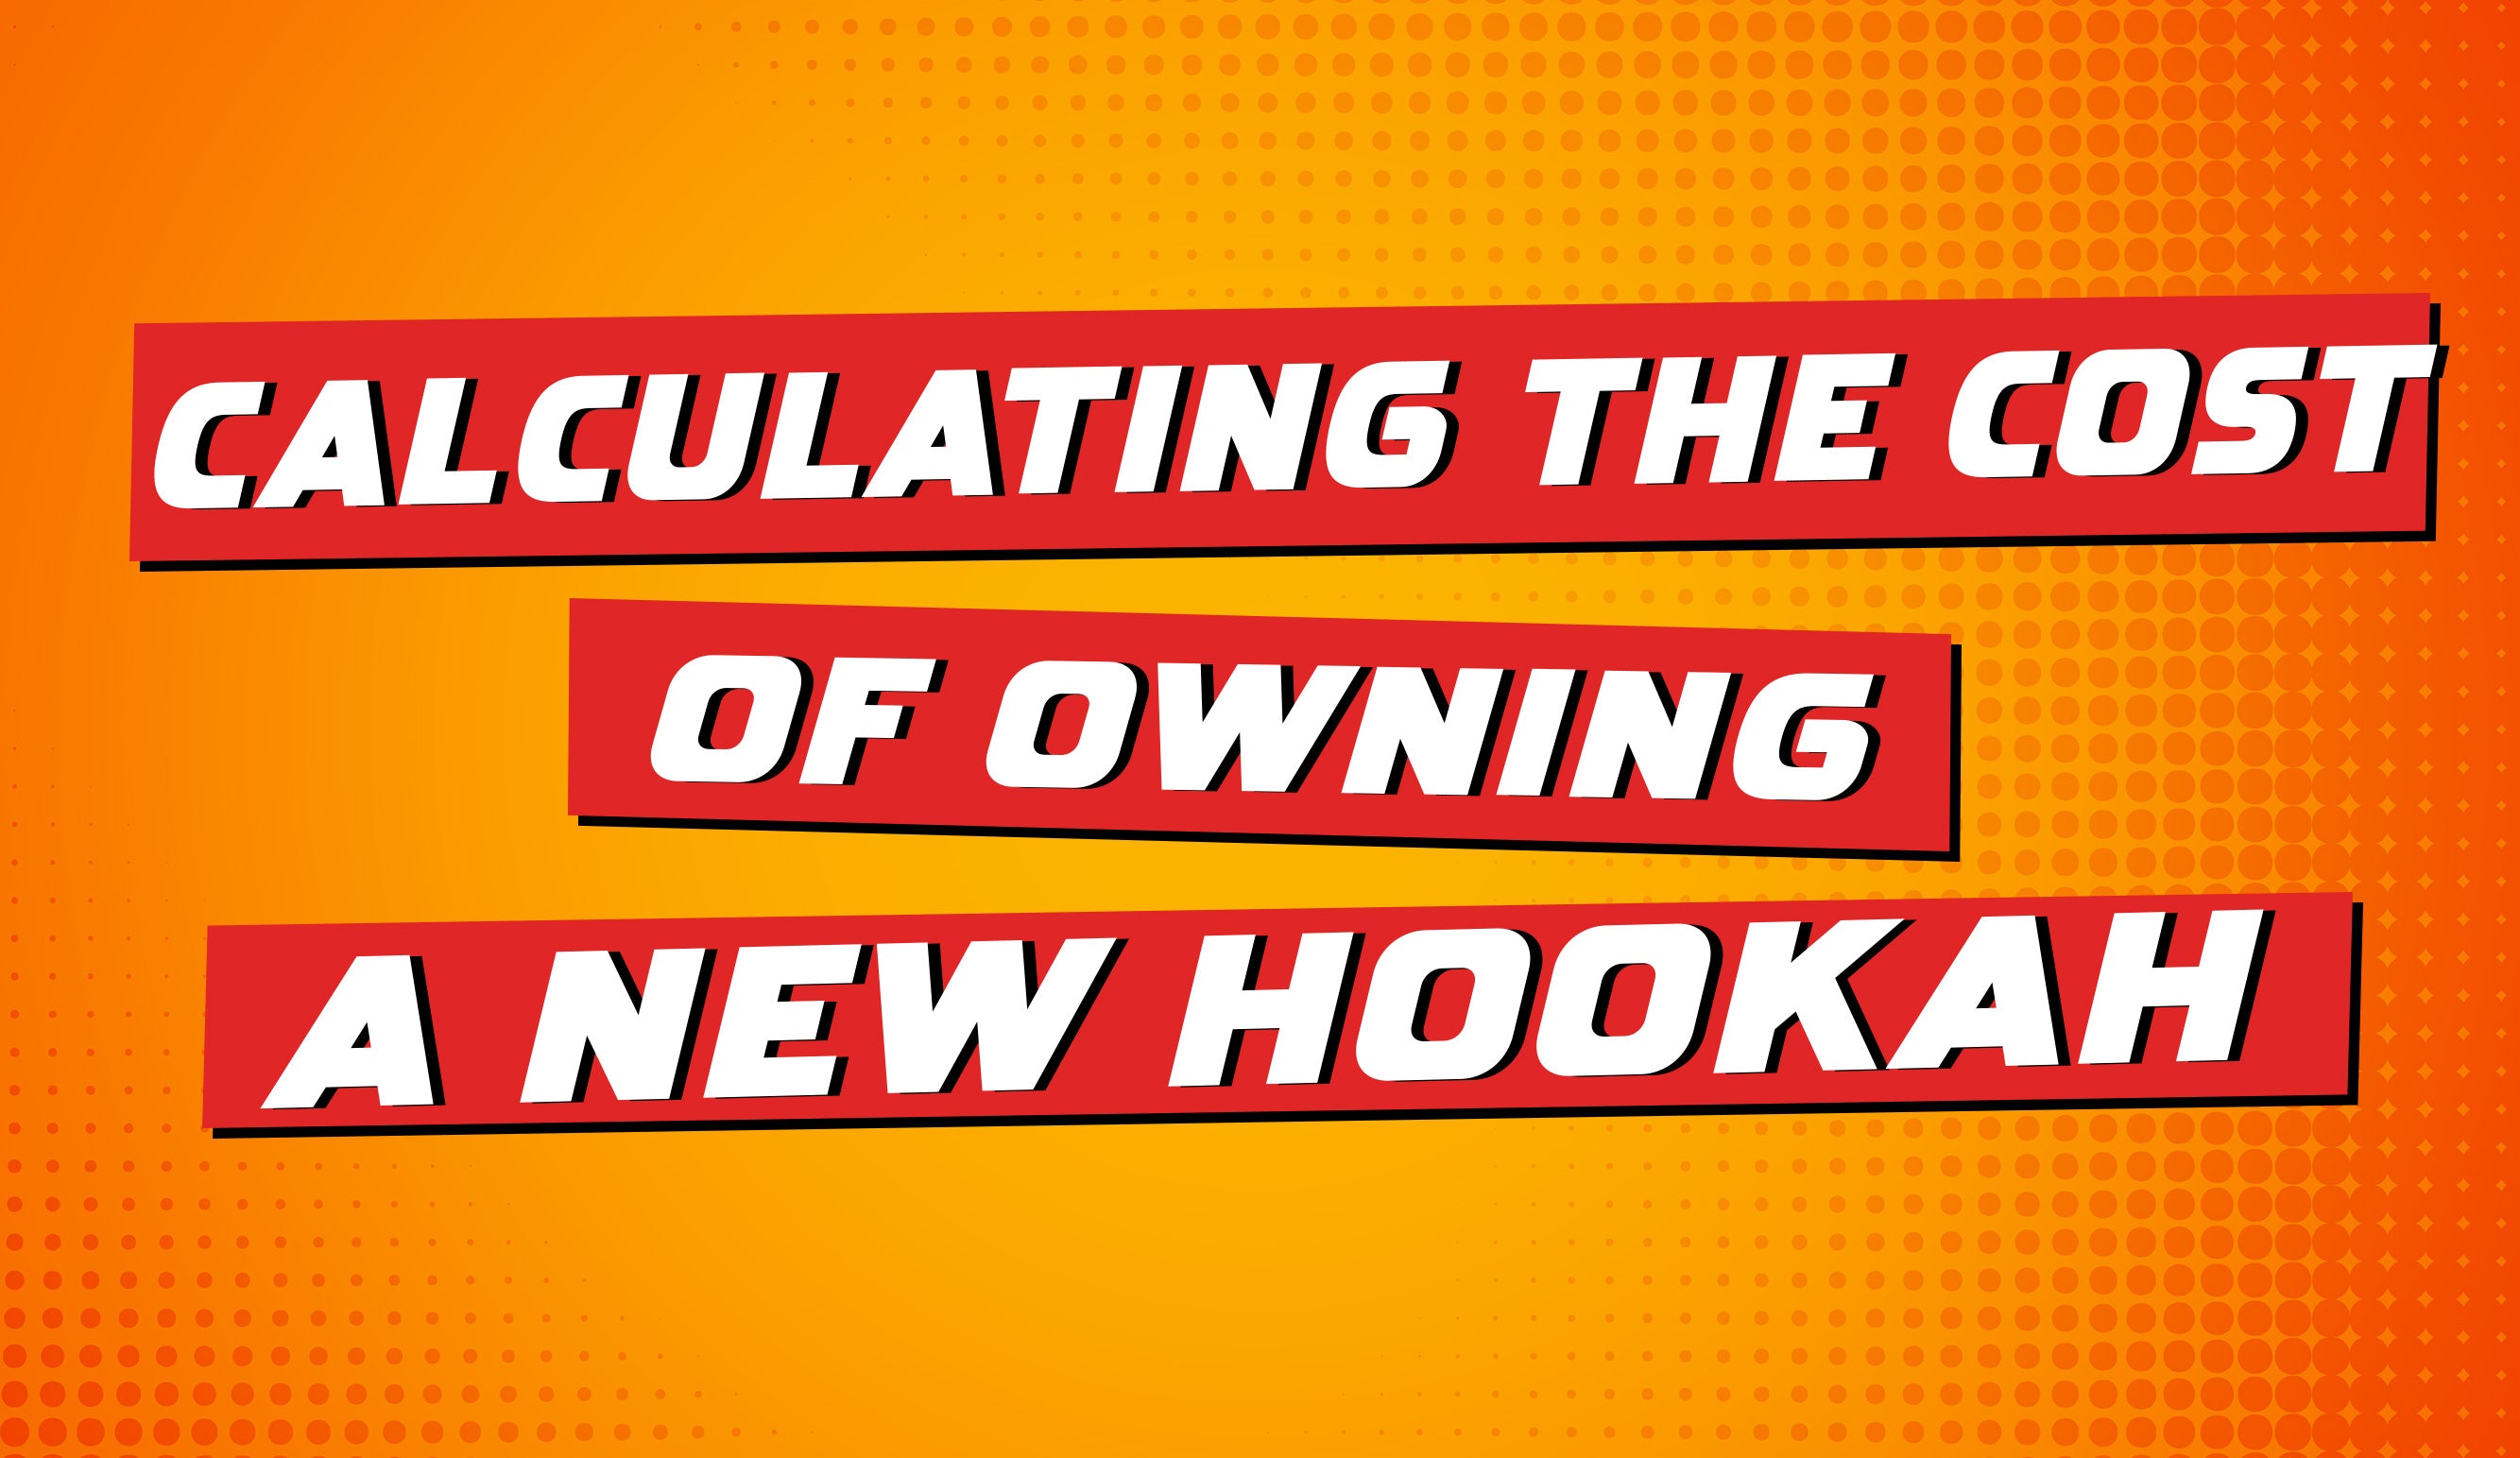 Calculating the Cost of Owning a New Hookah